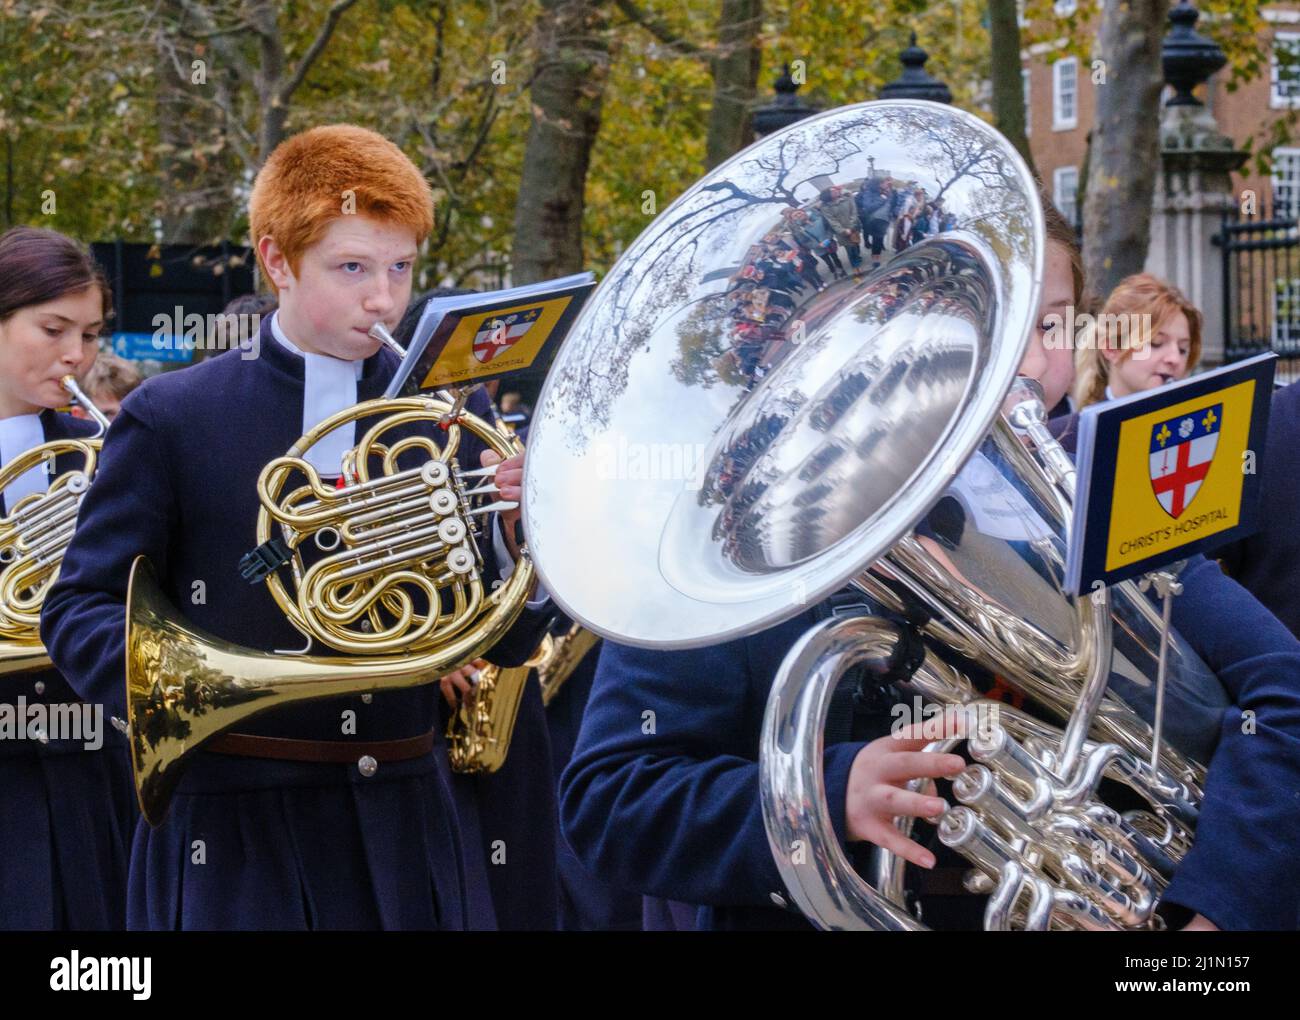 Close up of ginger haired boy playing French Horn and girl playing tuba with Christ’s Hospital School Band in the Lord Mayor’s Show 2021, London. Stock Photo